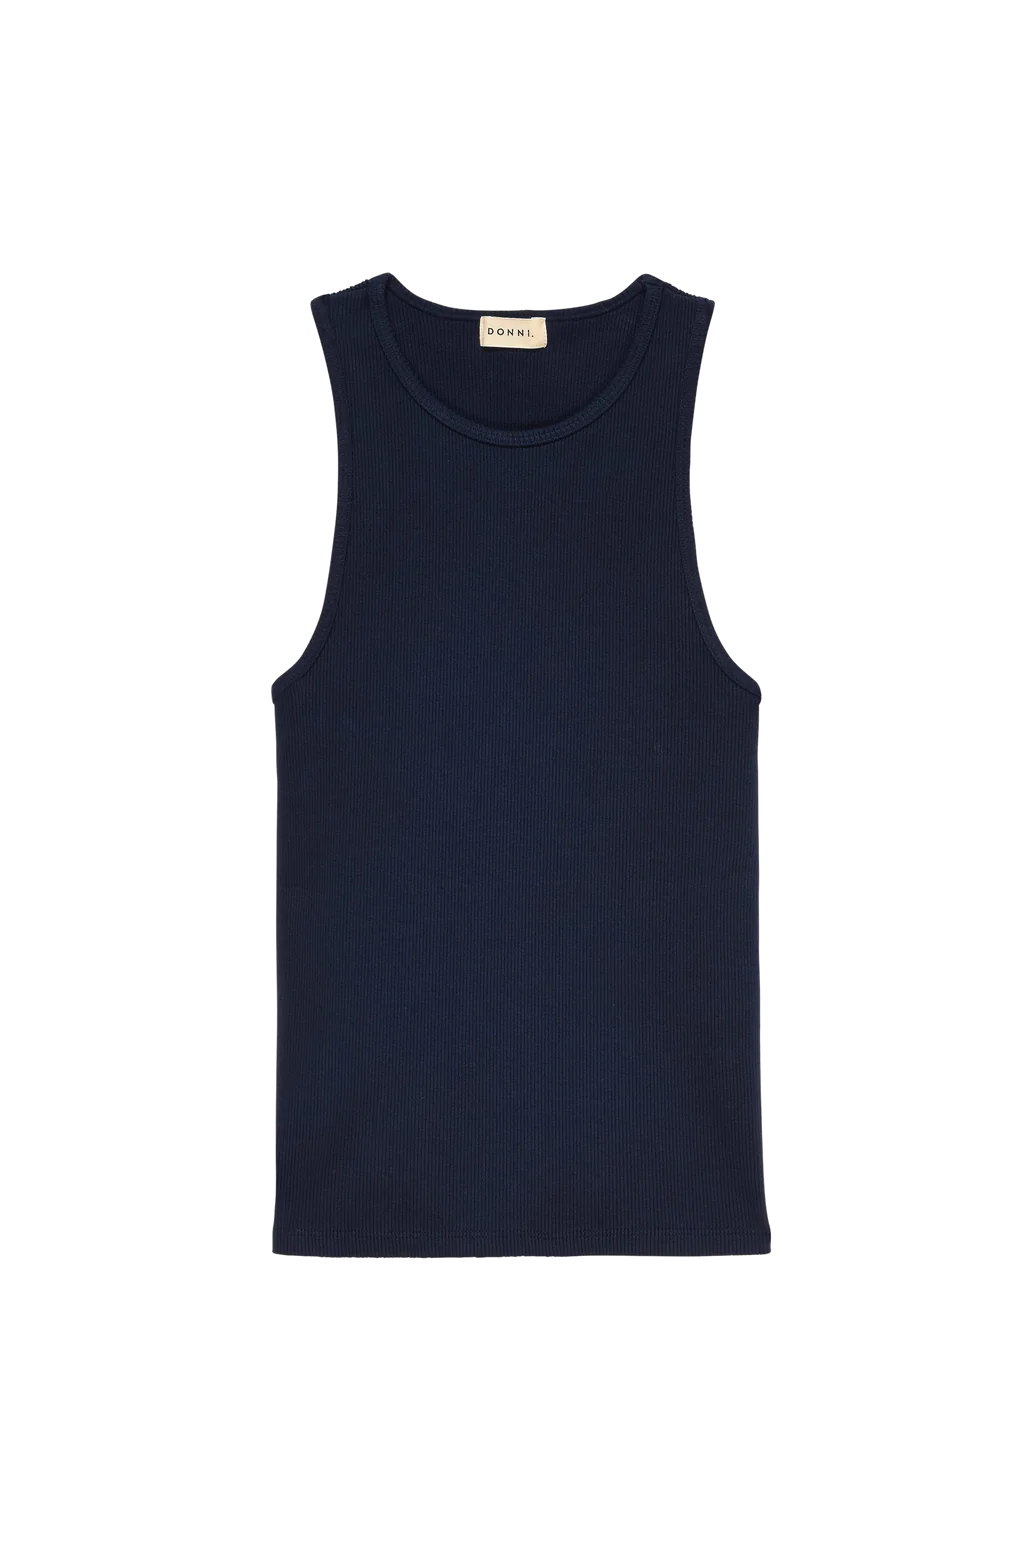 DONNI The Rib Tank in Navy